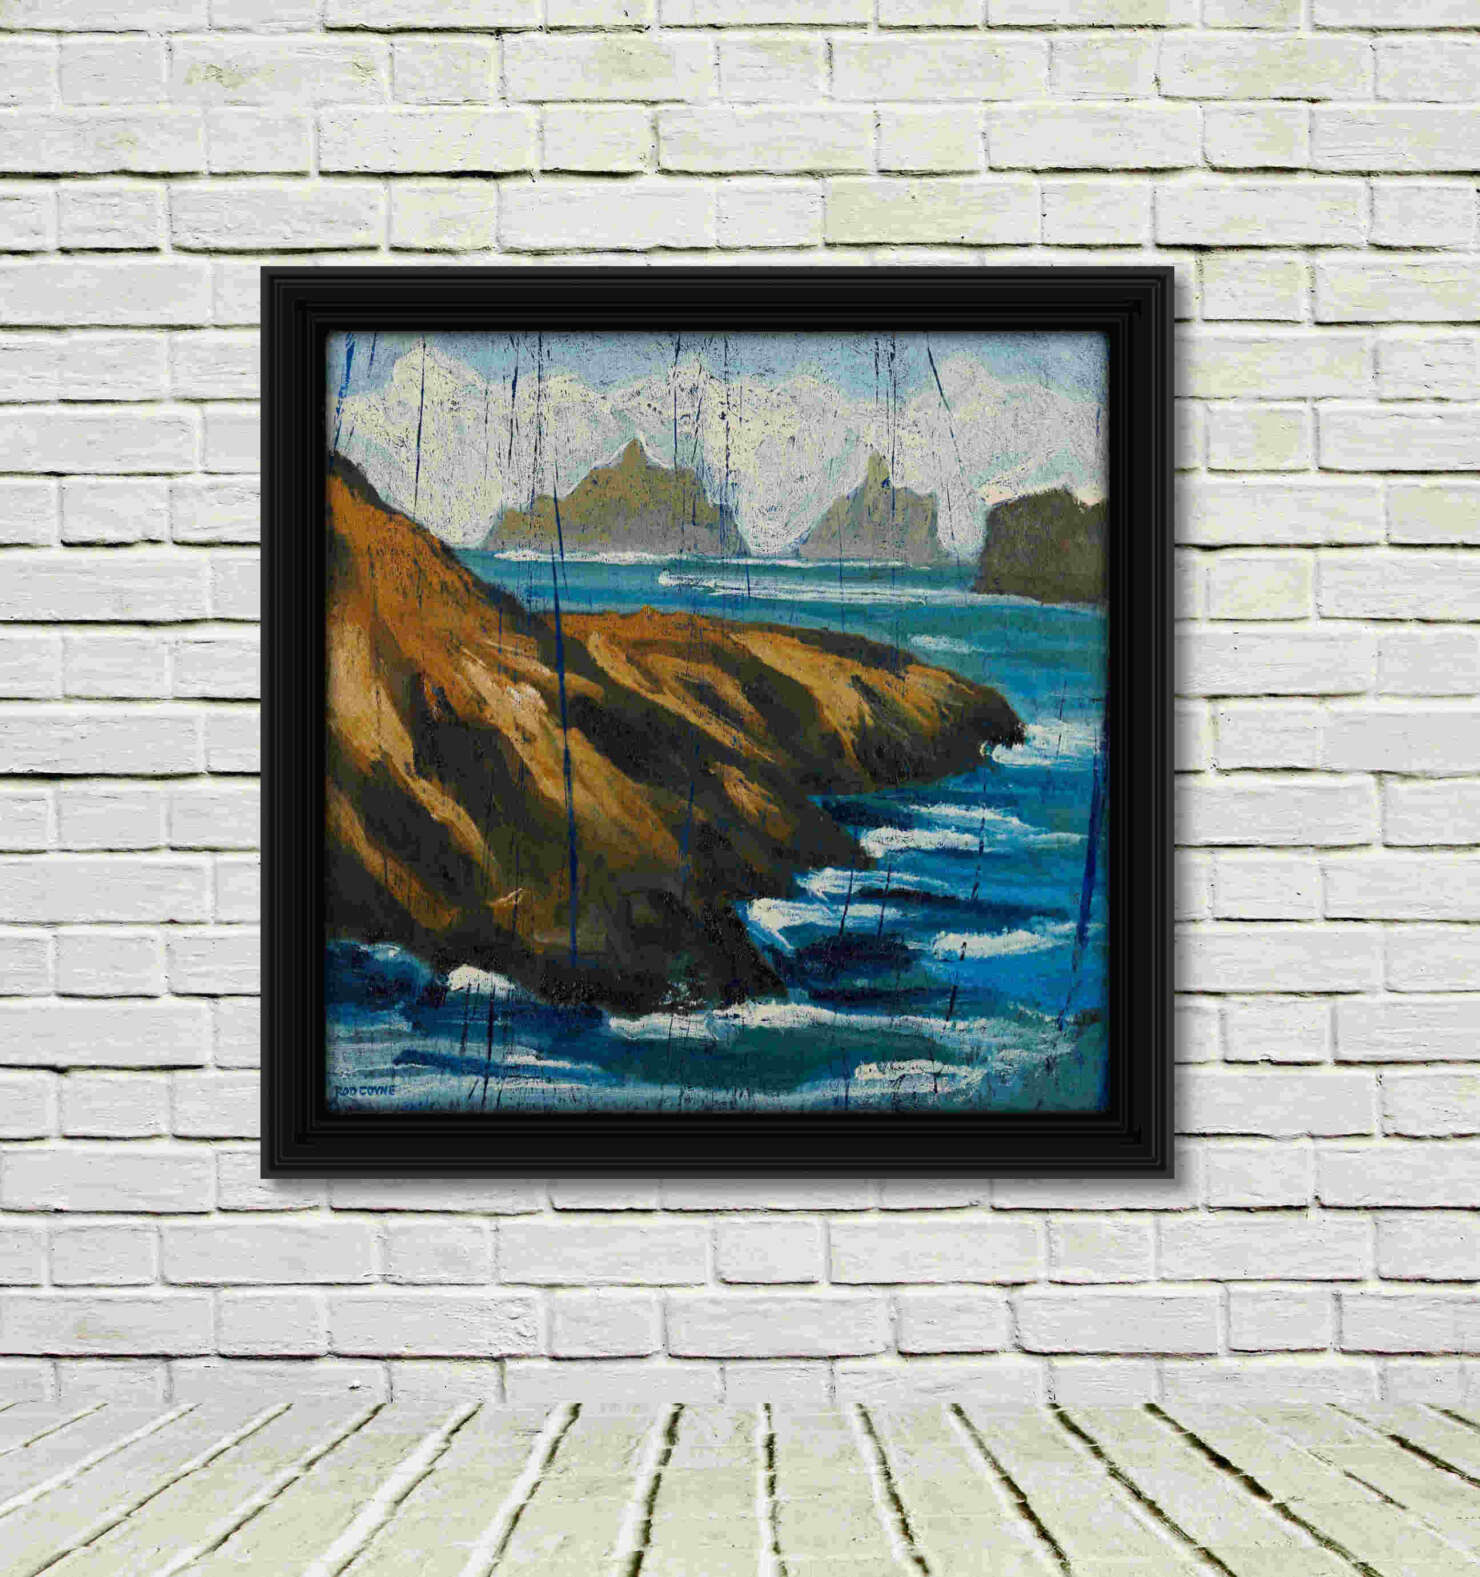 artist rod coyne's seascape "Kerry Islands" is shown here, in a black frame on a white wall.